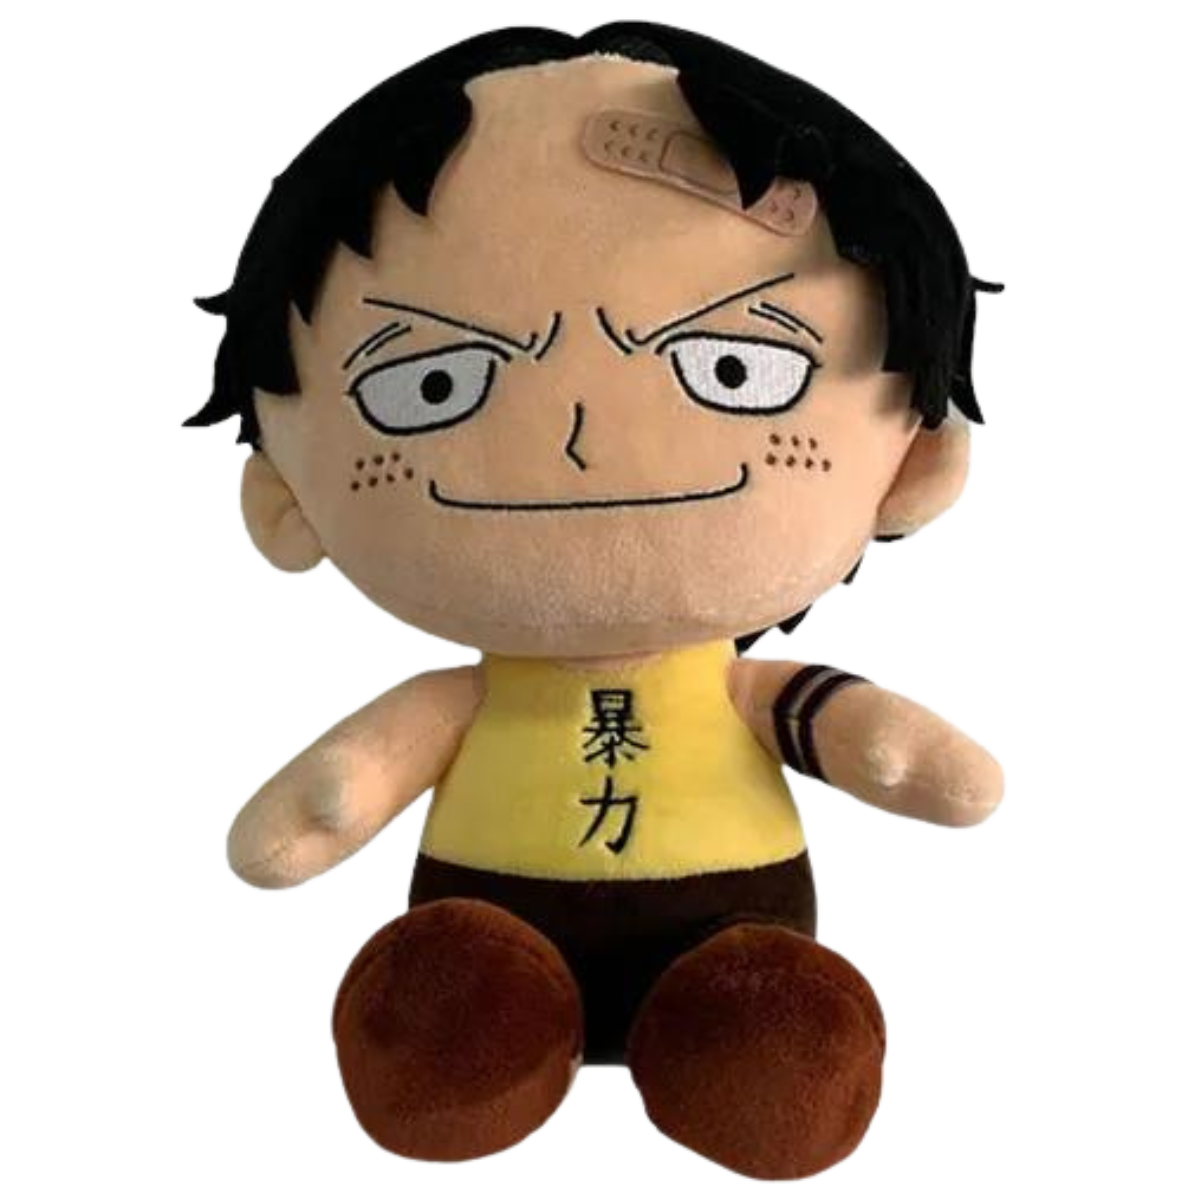 One Piece Chopper & Luffy Pillow Plush Collection - Character Pillows